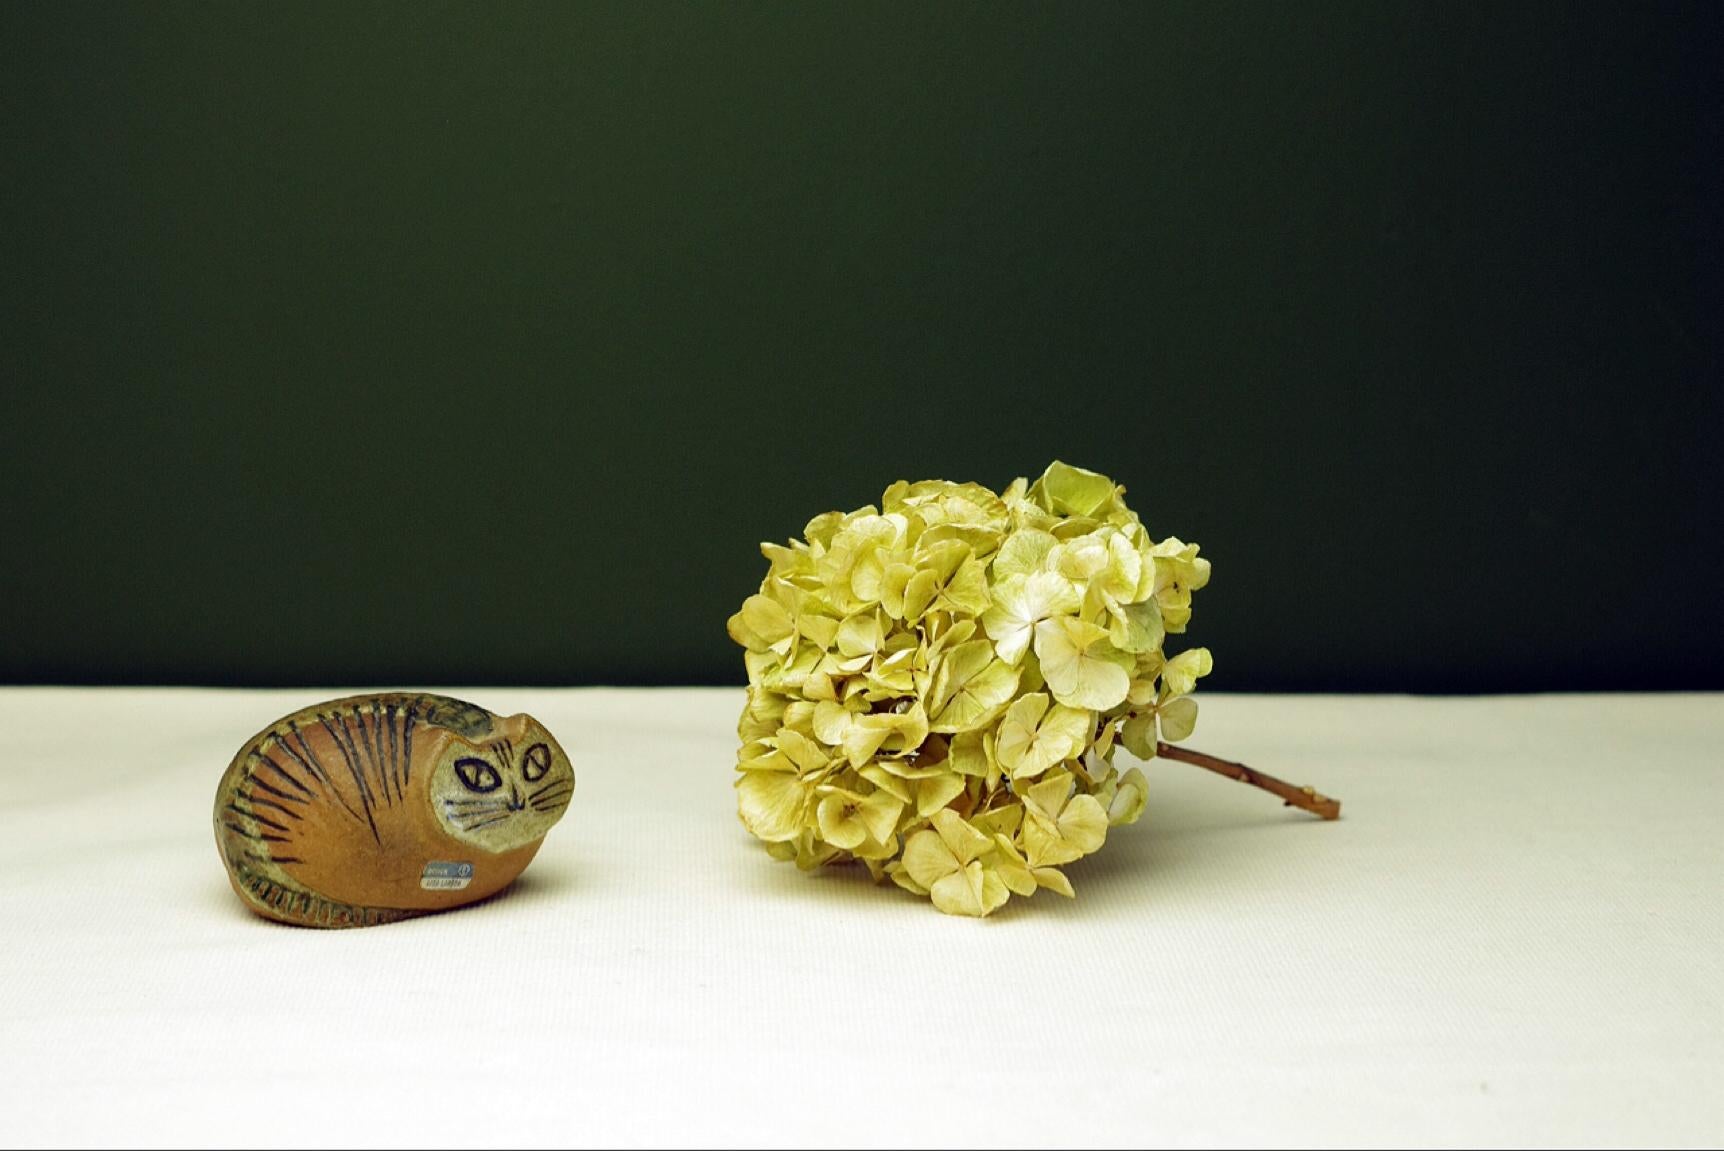 Product Description: 
This work is part of Lisa Larson's early series. The name of the series, Lilla Zoo, translates top 